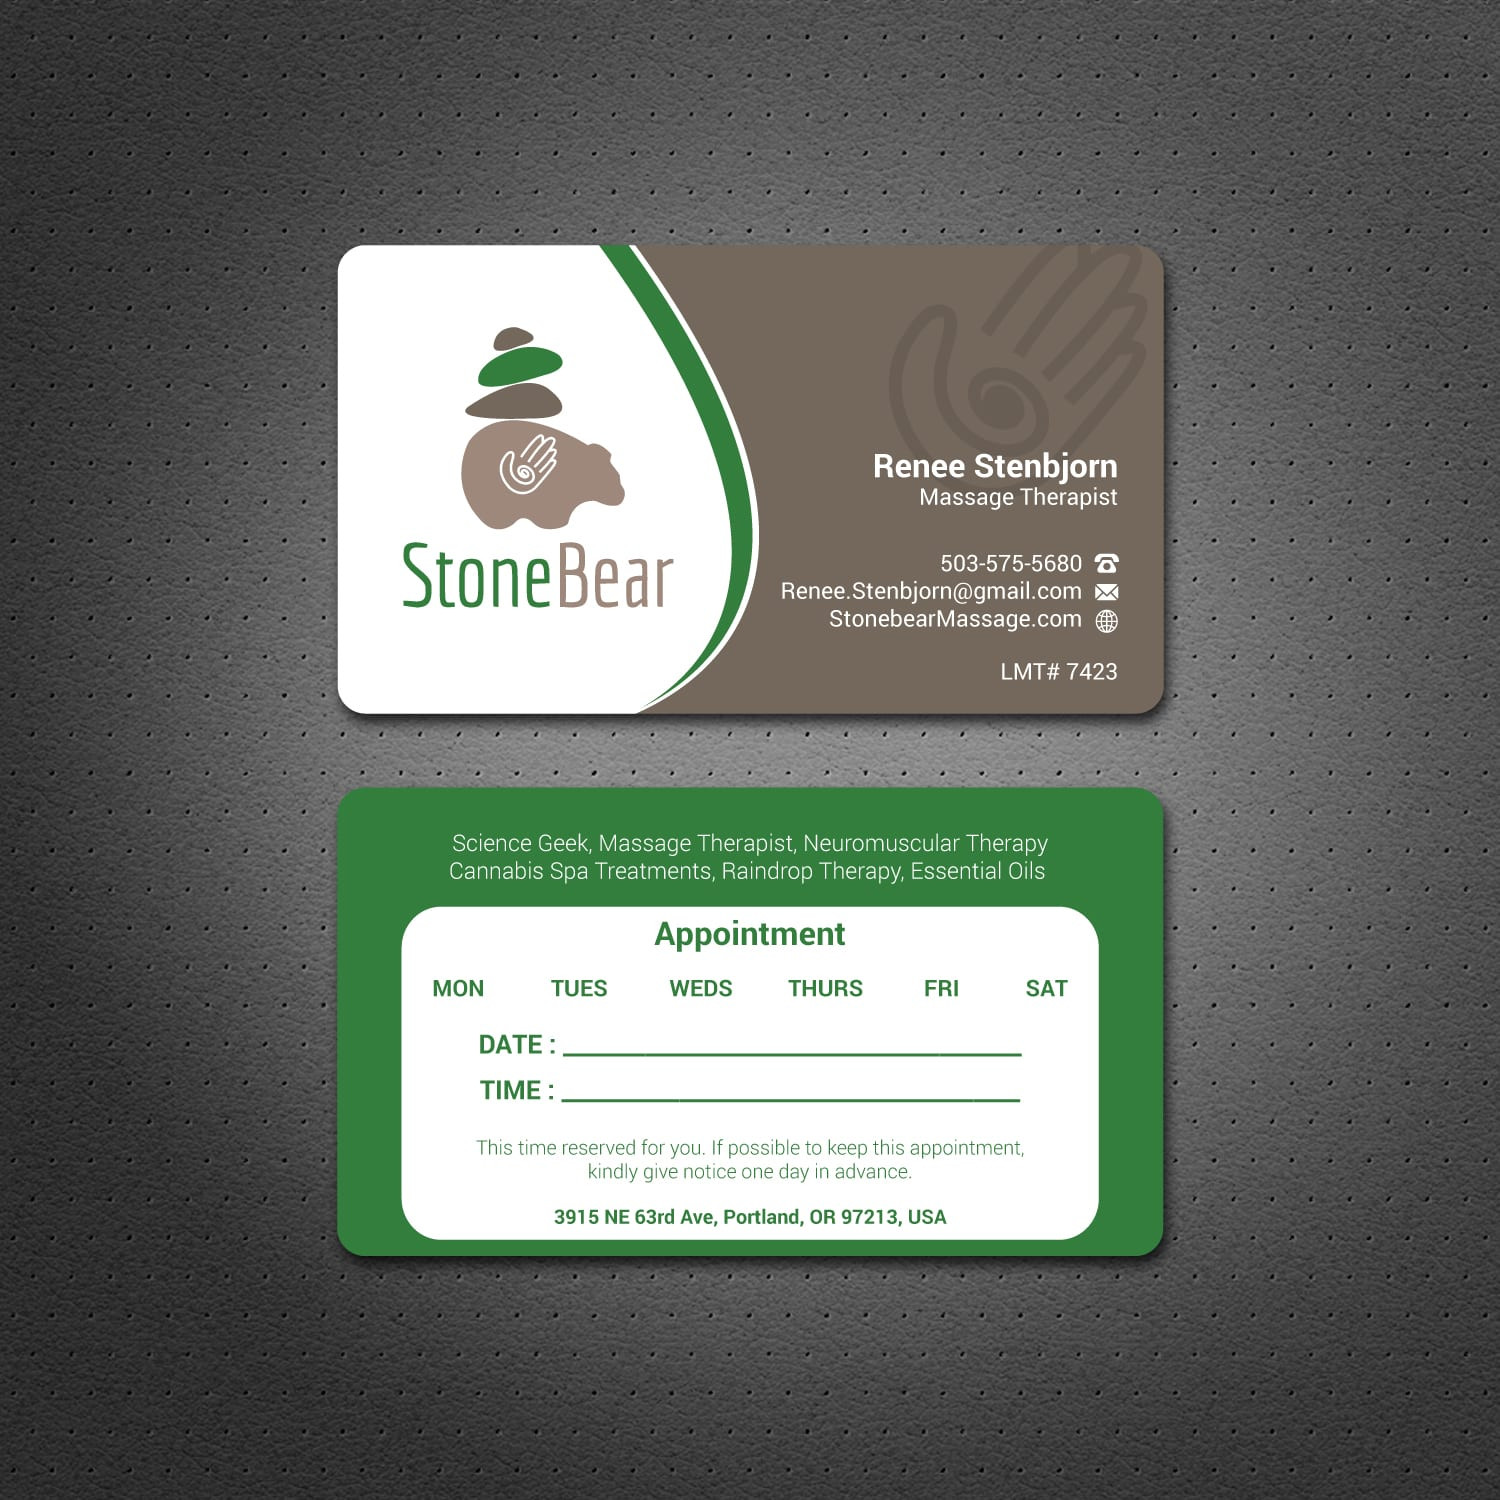 Mobile Massage therapist Business Cards Best Student Of Massage therapy Business Card Templates